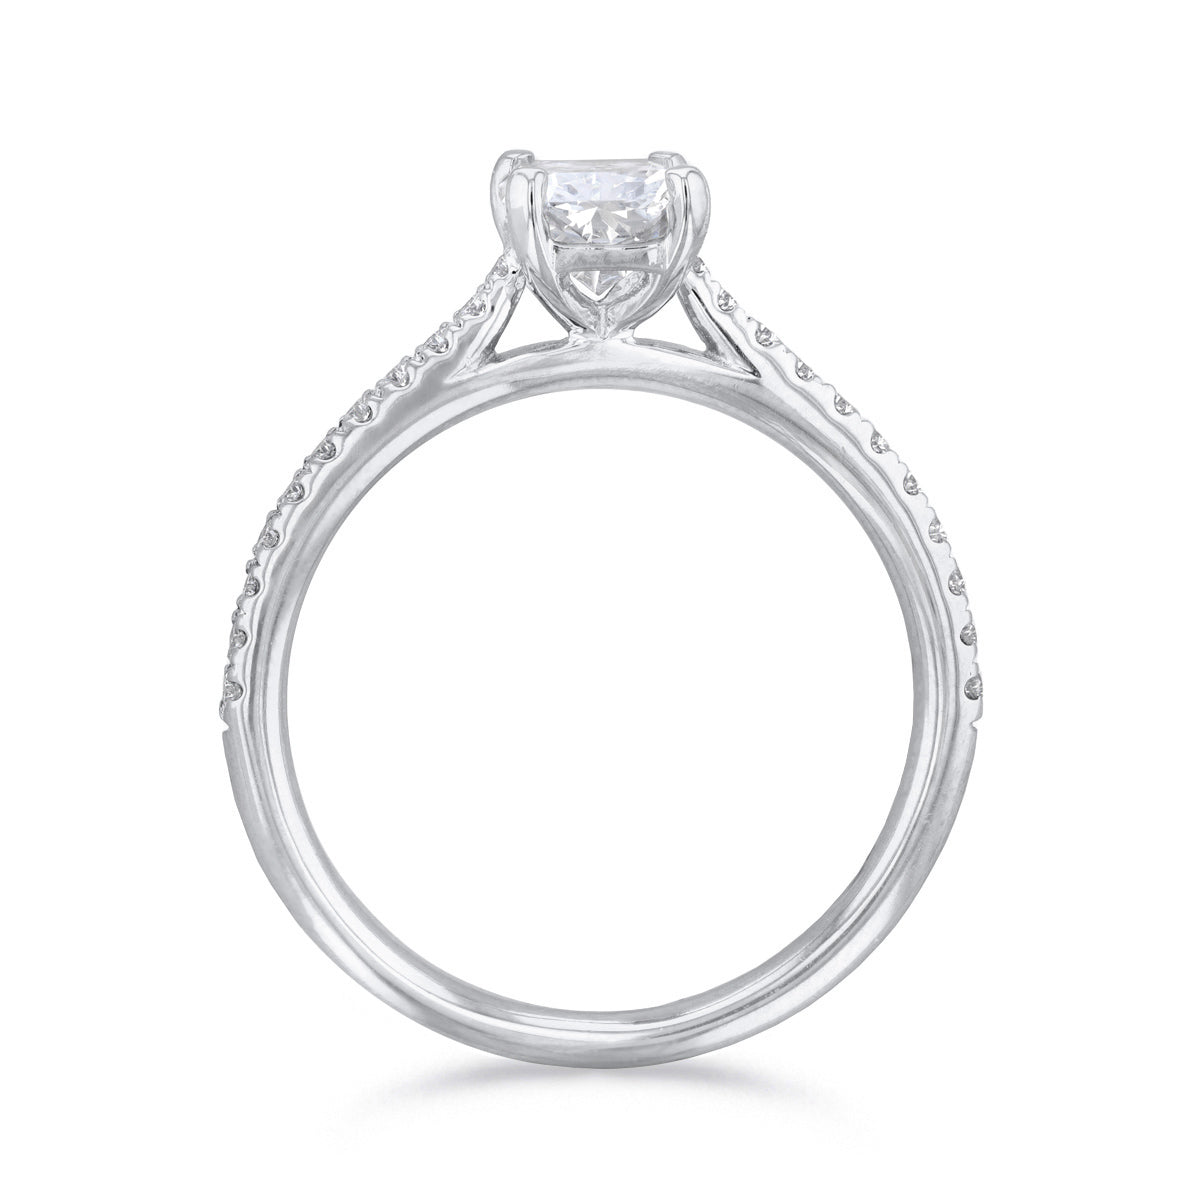 0-50ct-ophelia-shoulder-set-radiant-cut-solitaire-diamond-engagement-ring-18ct-white-gold